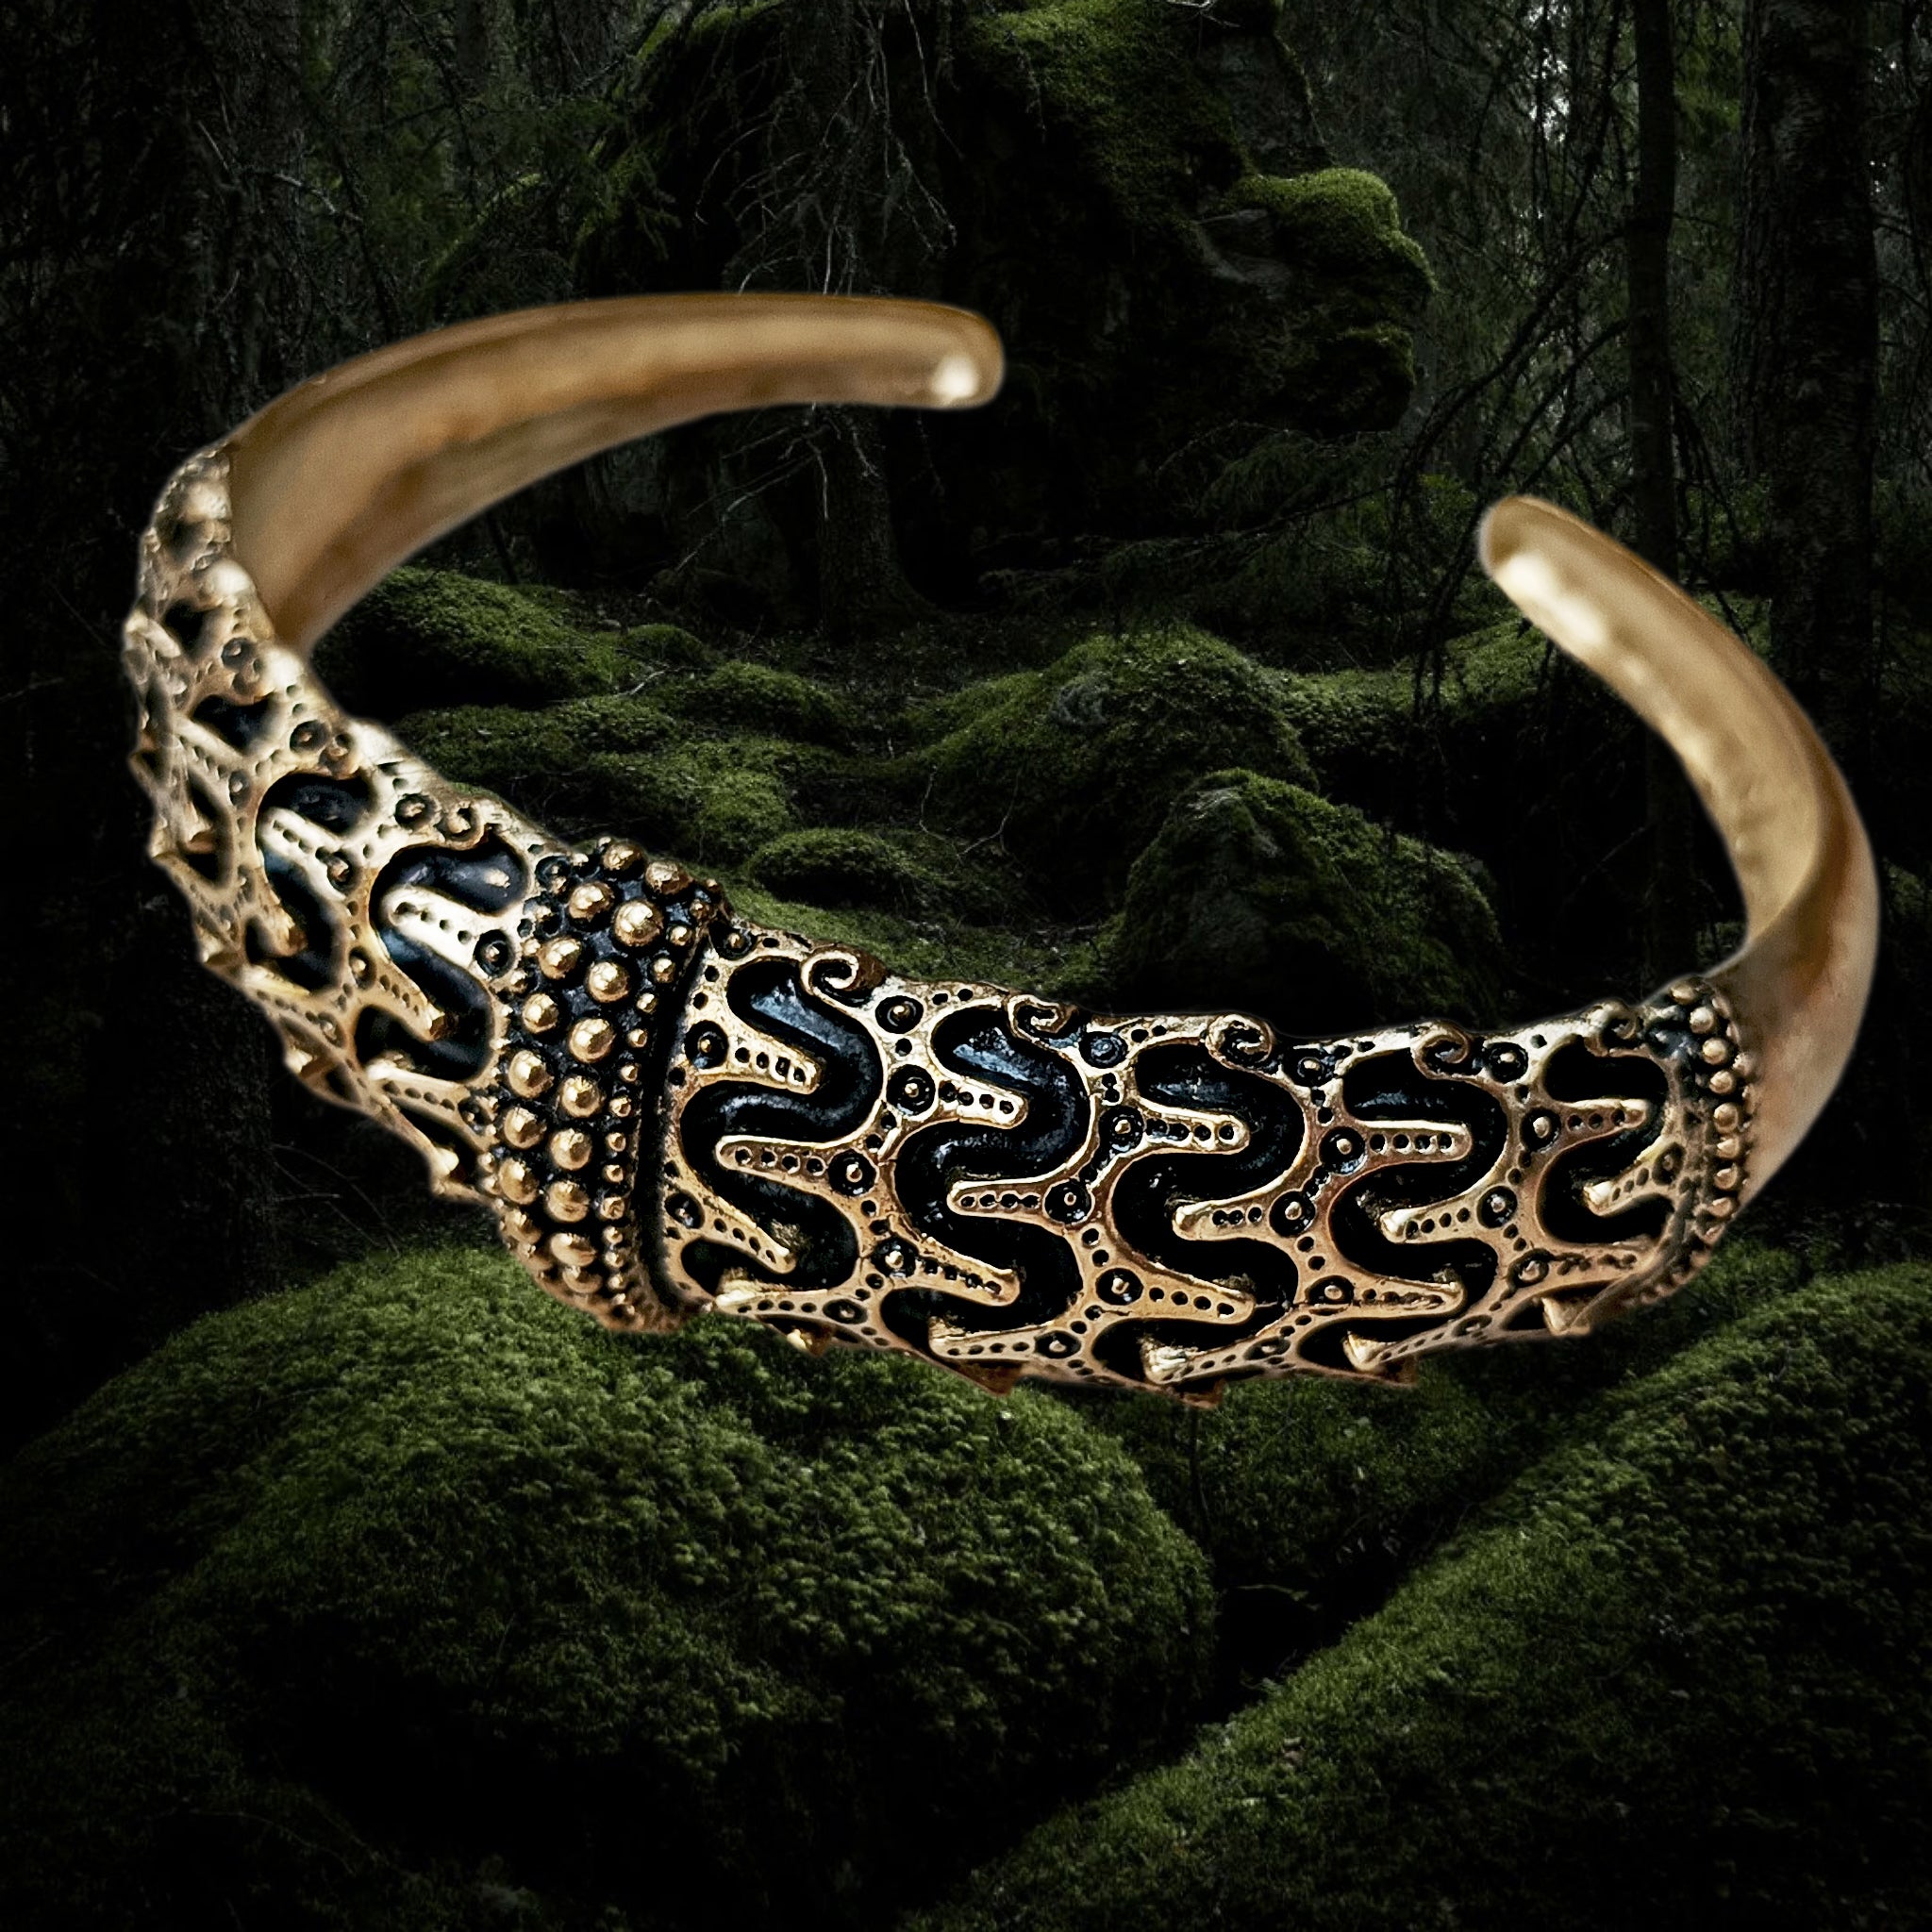 Bronze Replica Viking Bracelet / Arm Ring from Falster - Angle View